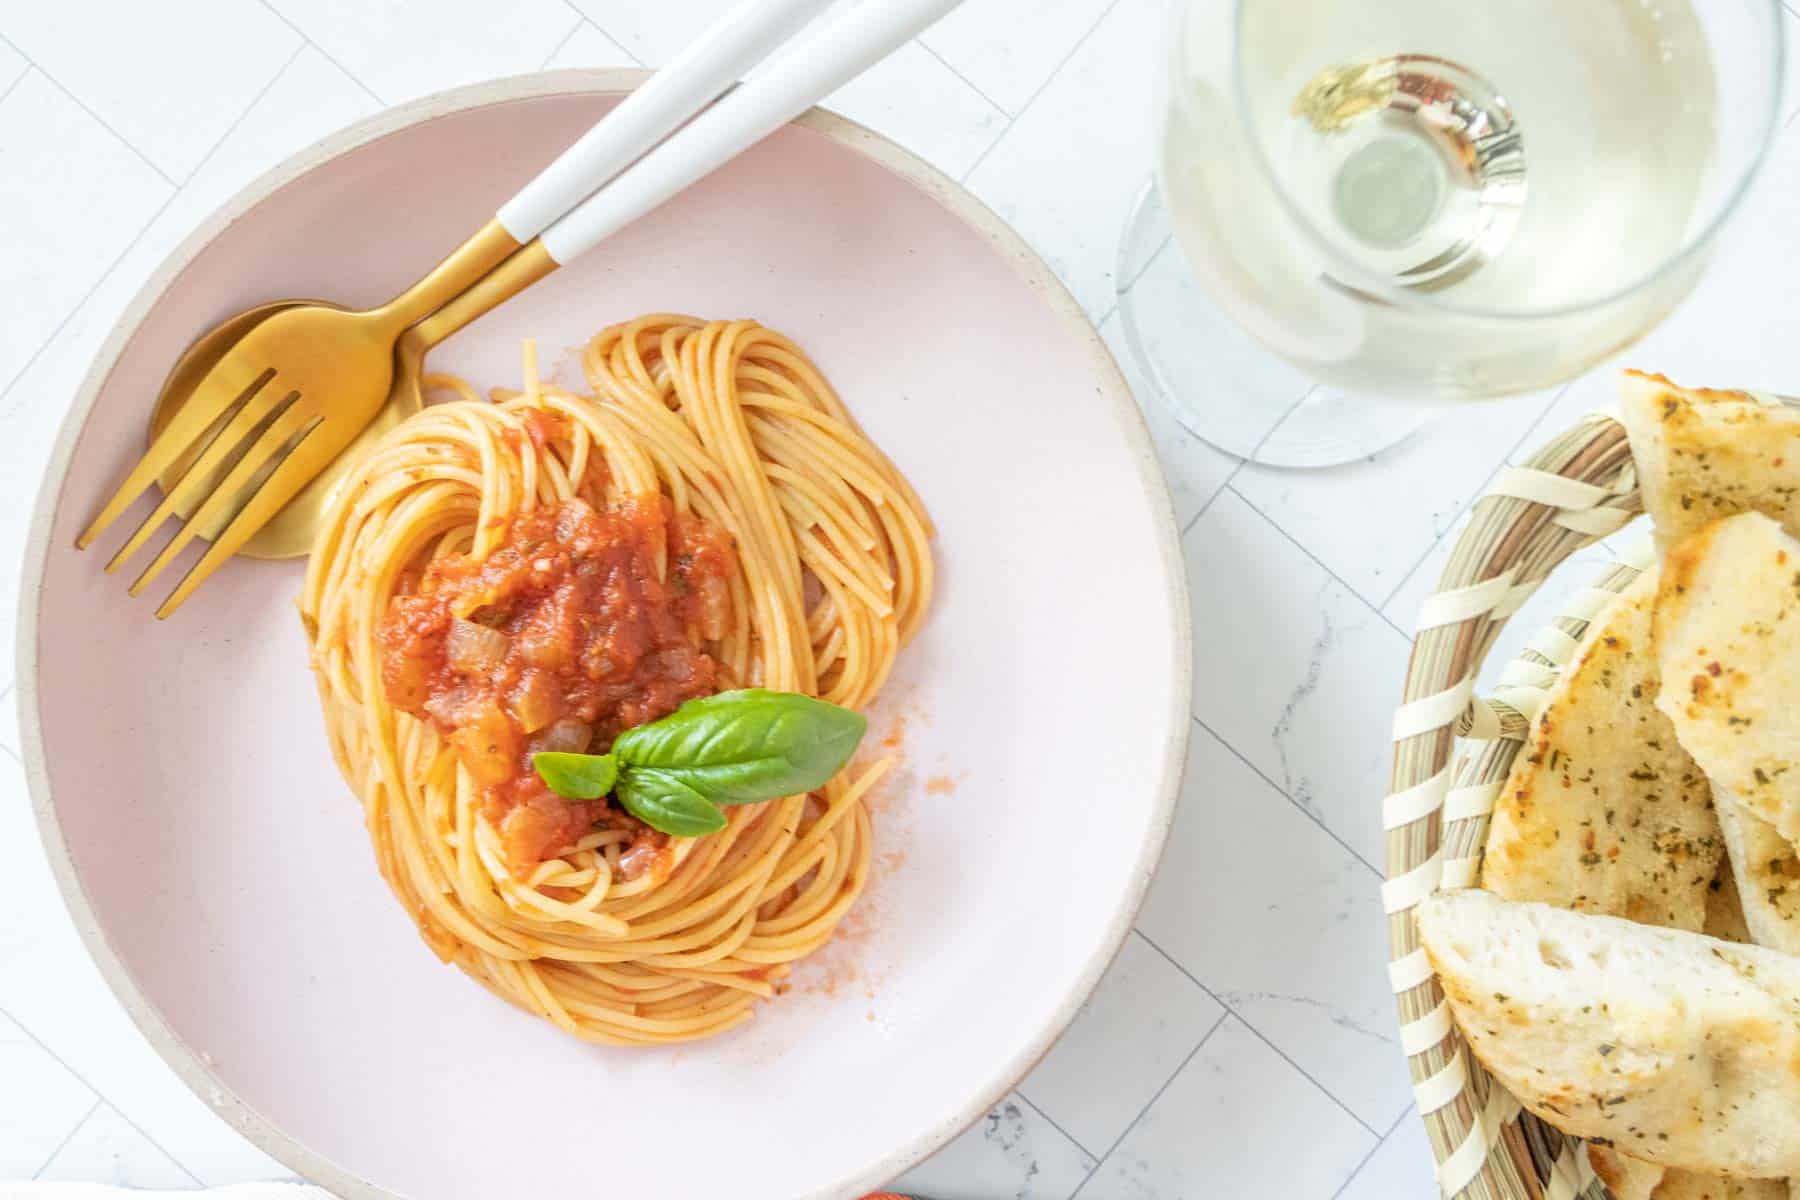 A plate of spaghetti and a glass of wine.